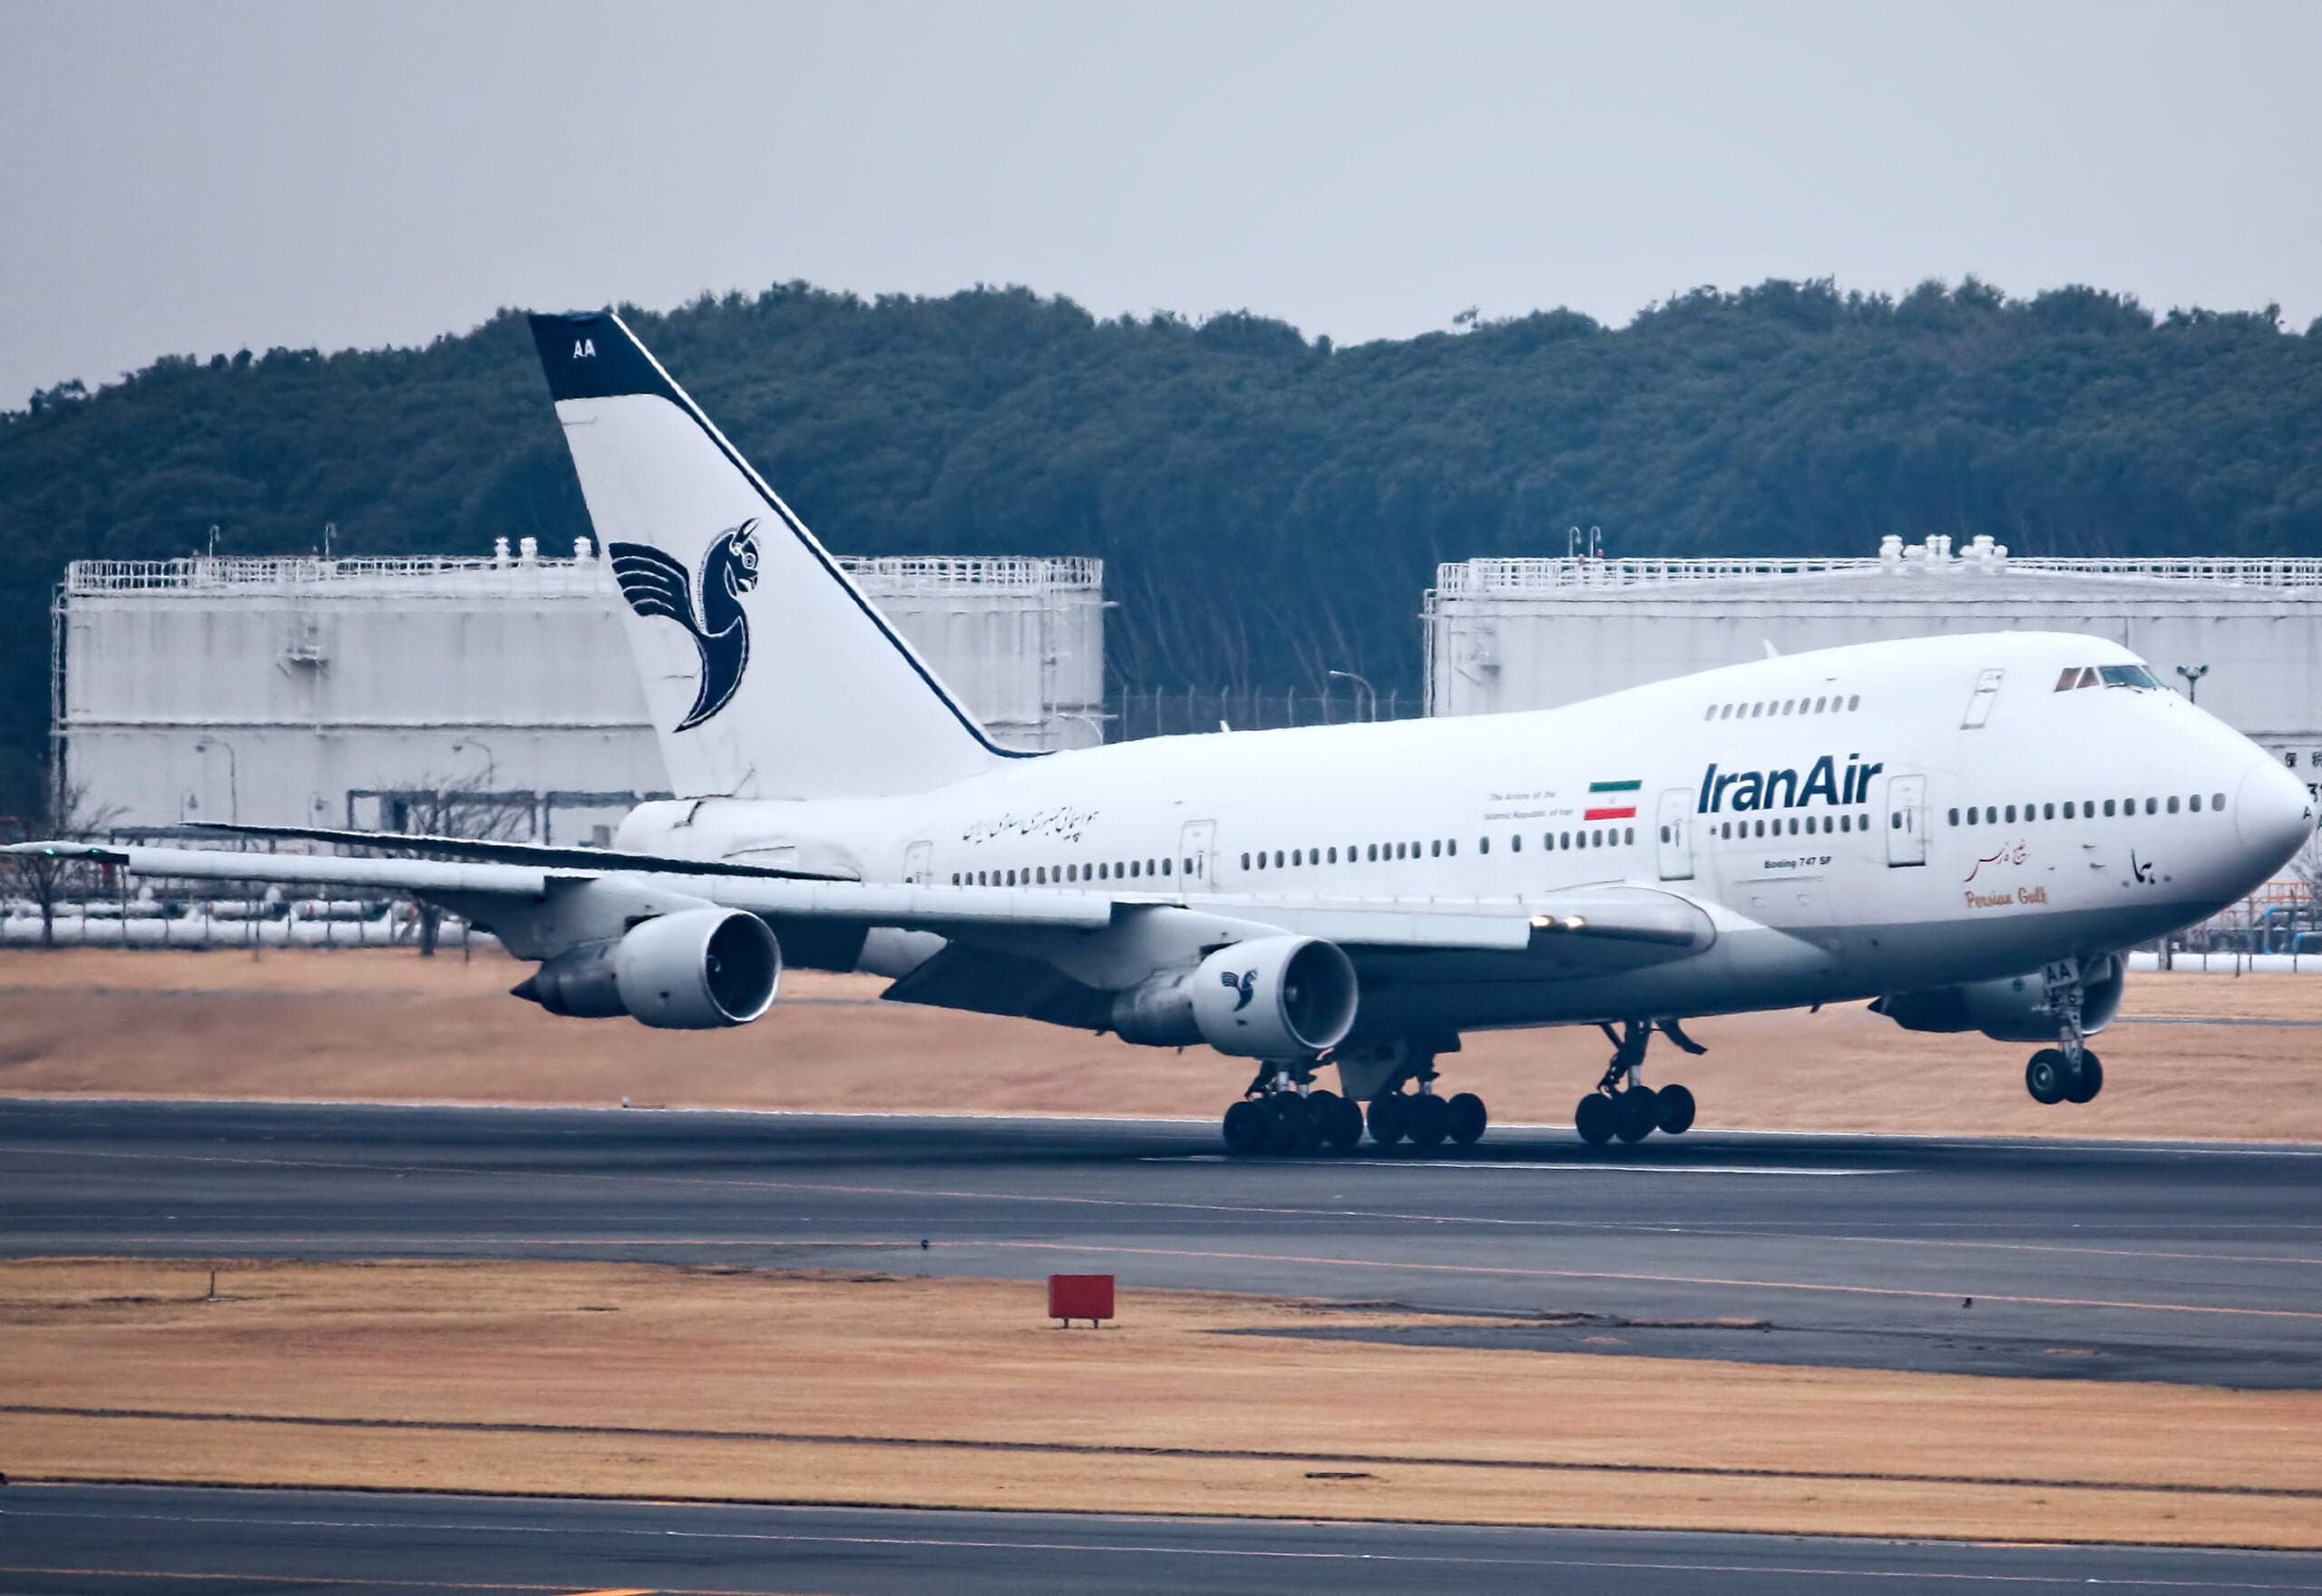 Iran Air Is Selling Off Part Of Its Fleet Of Vintage Western Airliners